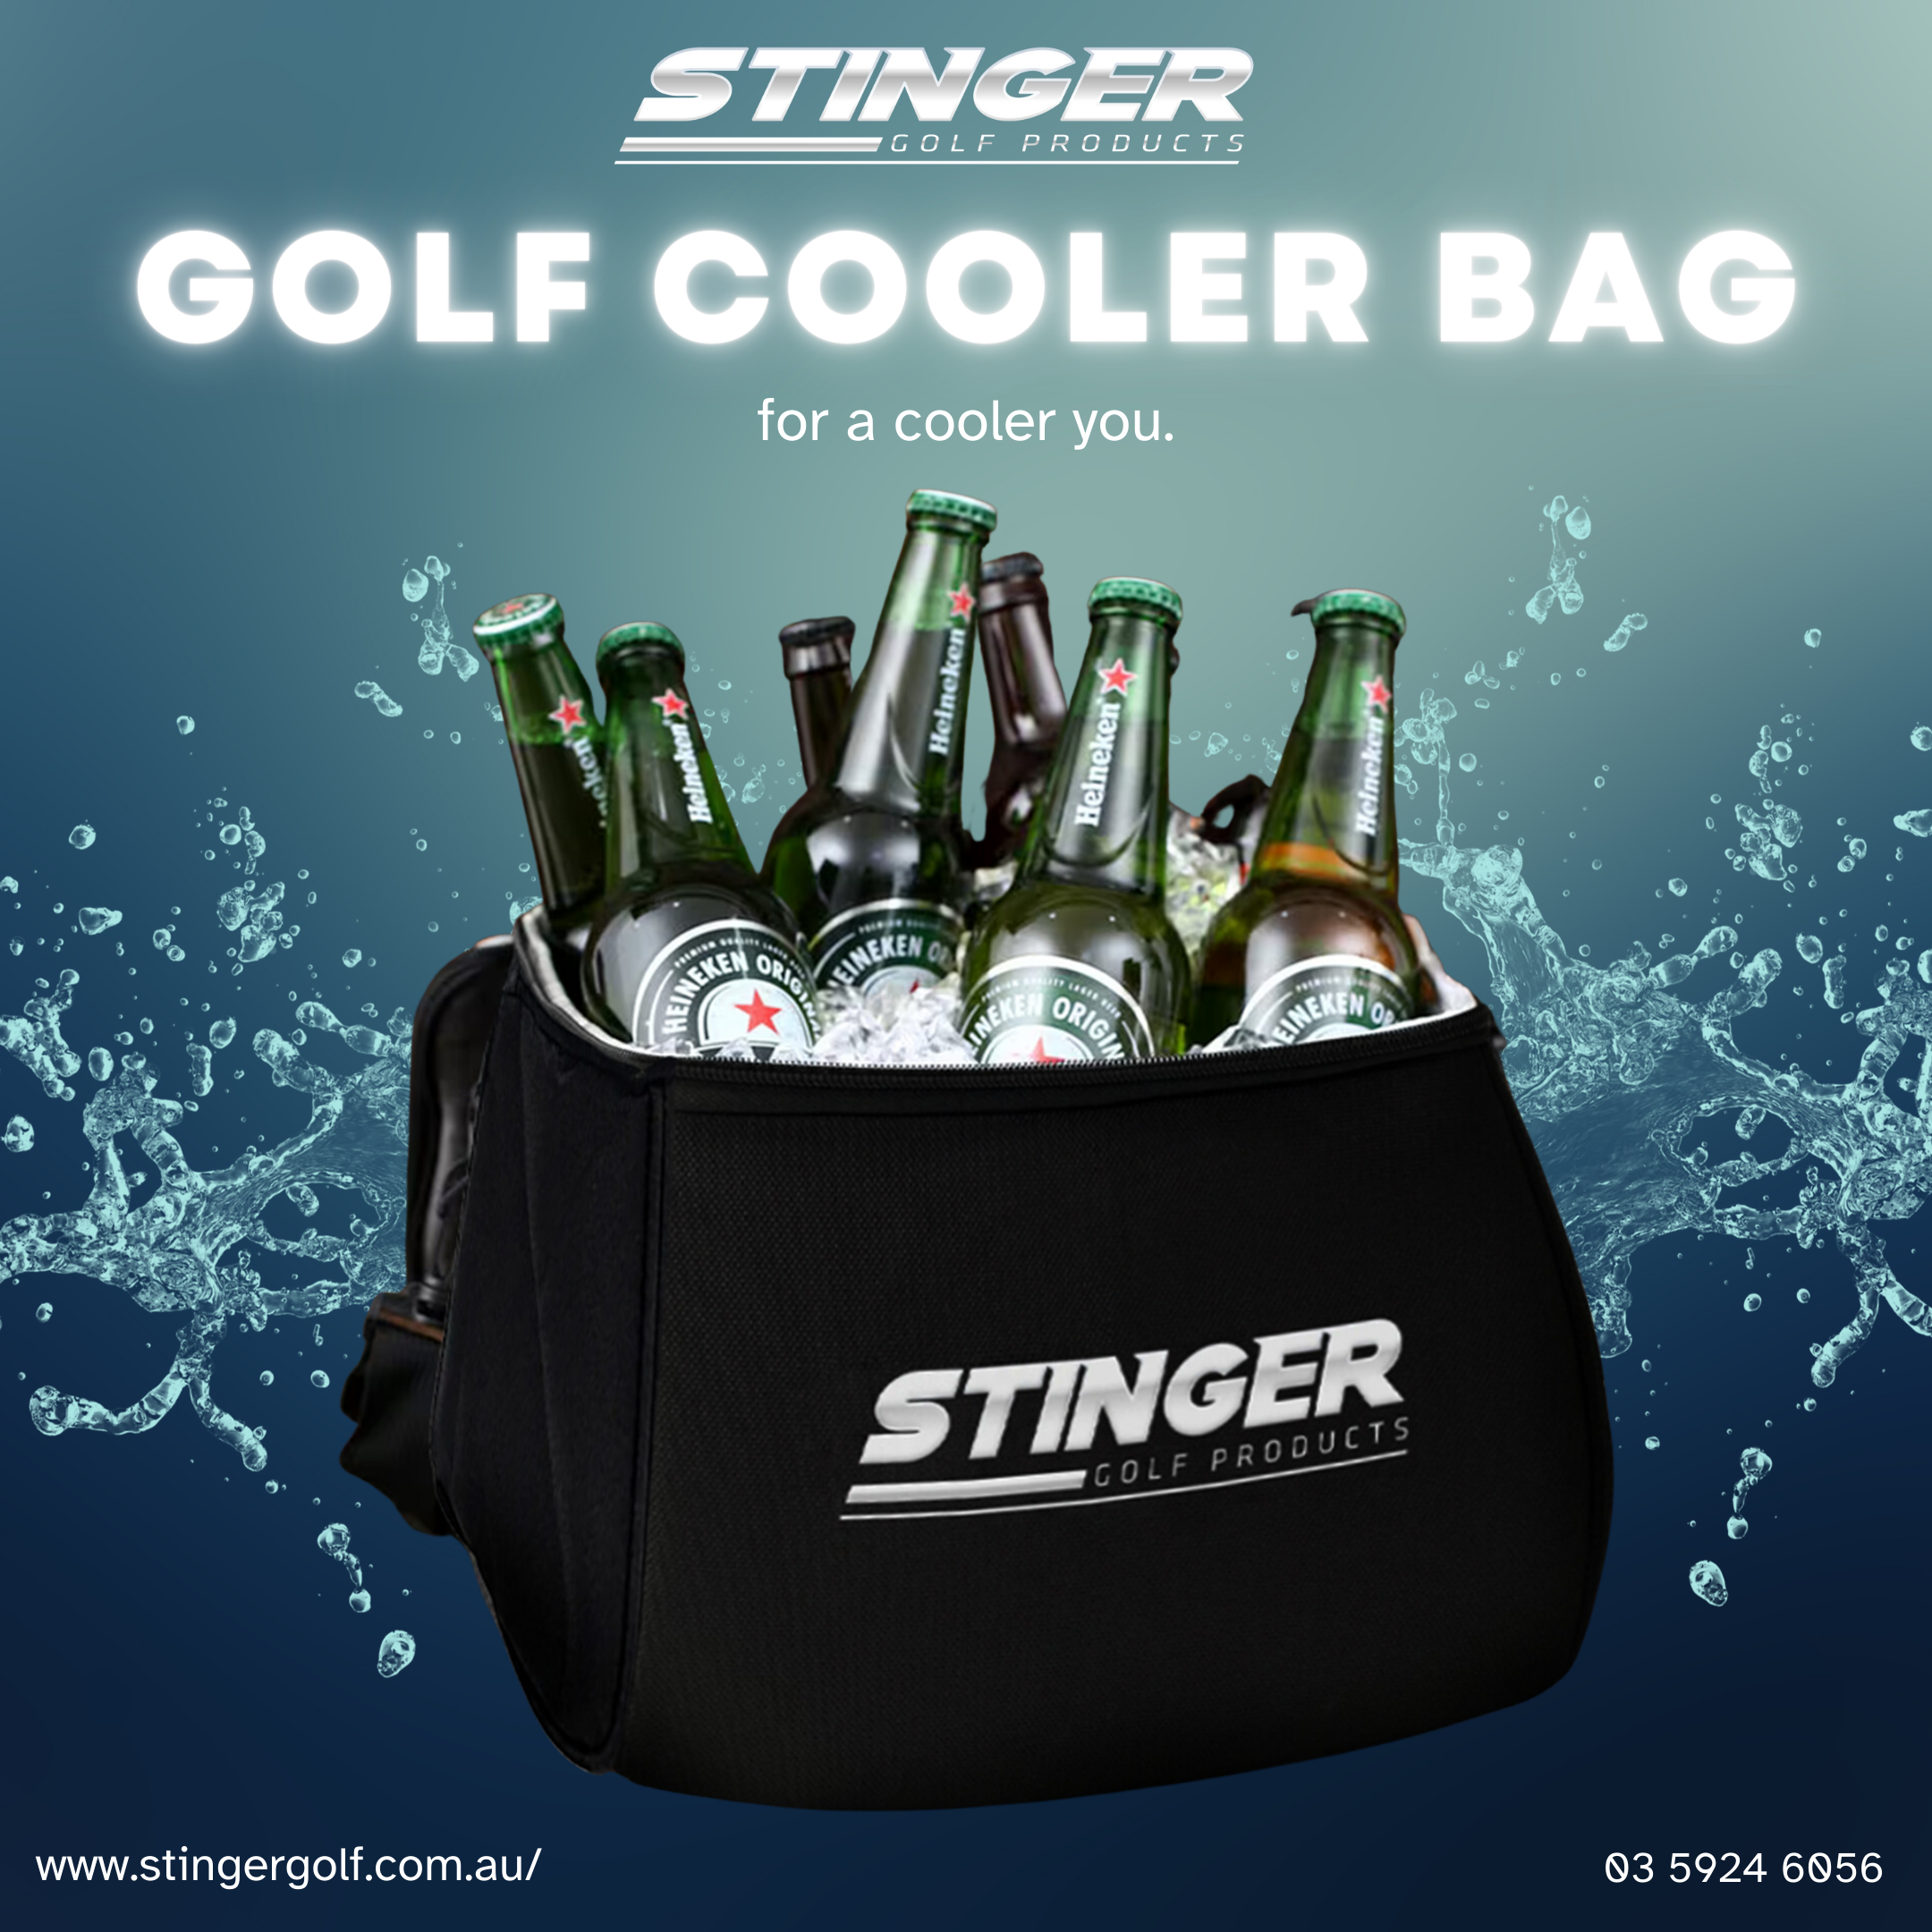 Keep those beers cold with the Stinger Chiller!